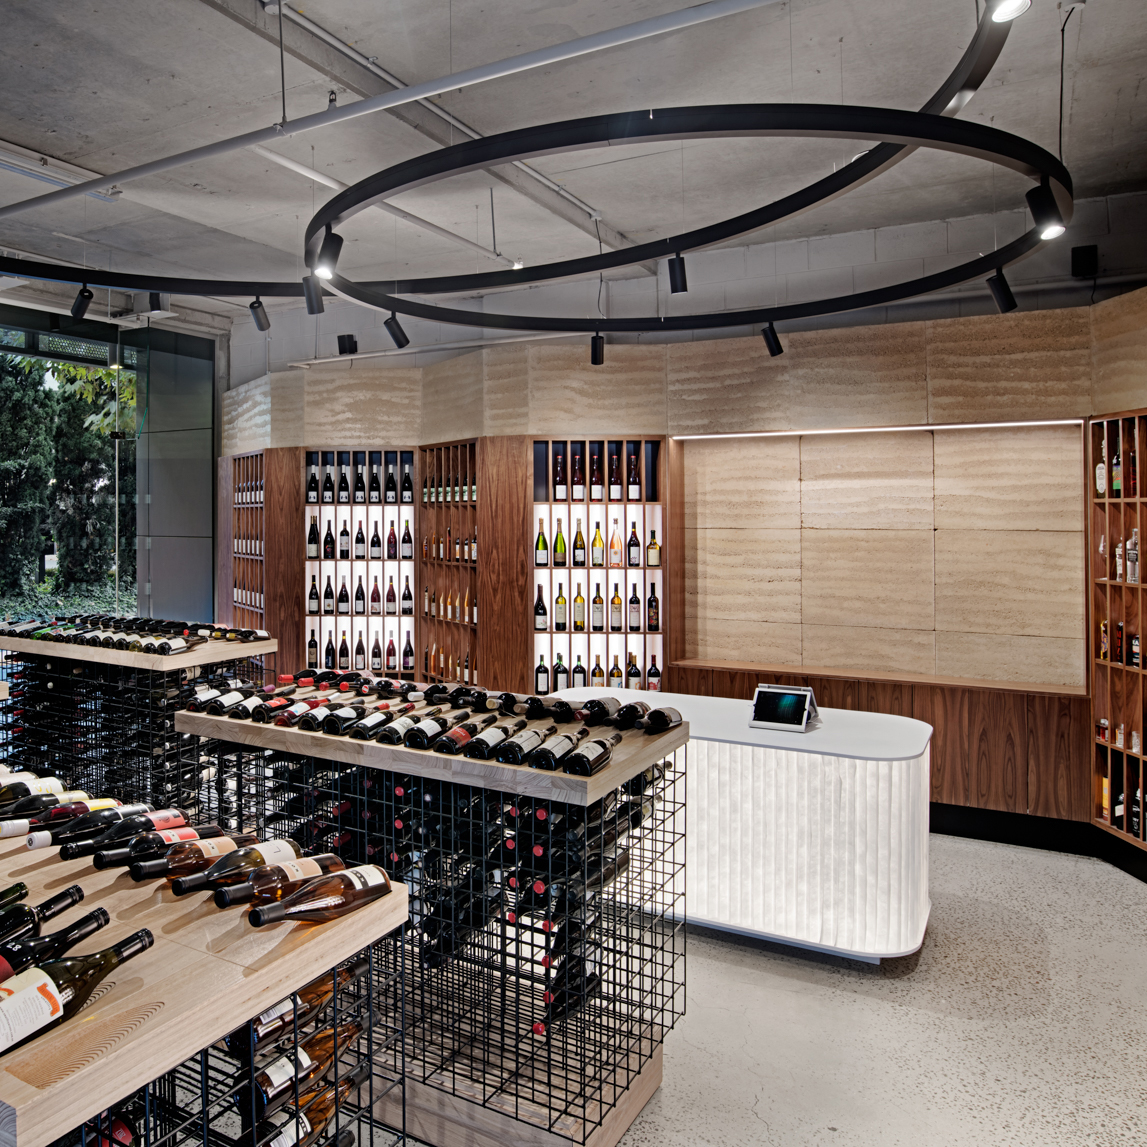 Act Of Wine | A bespoke ring light gives this retail space the perfect aftertaste.